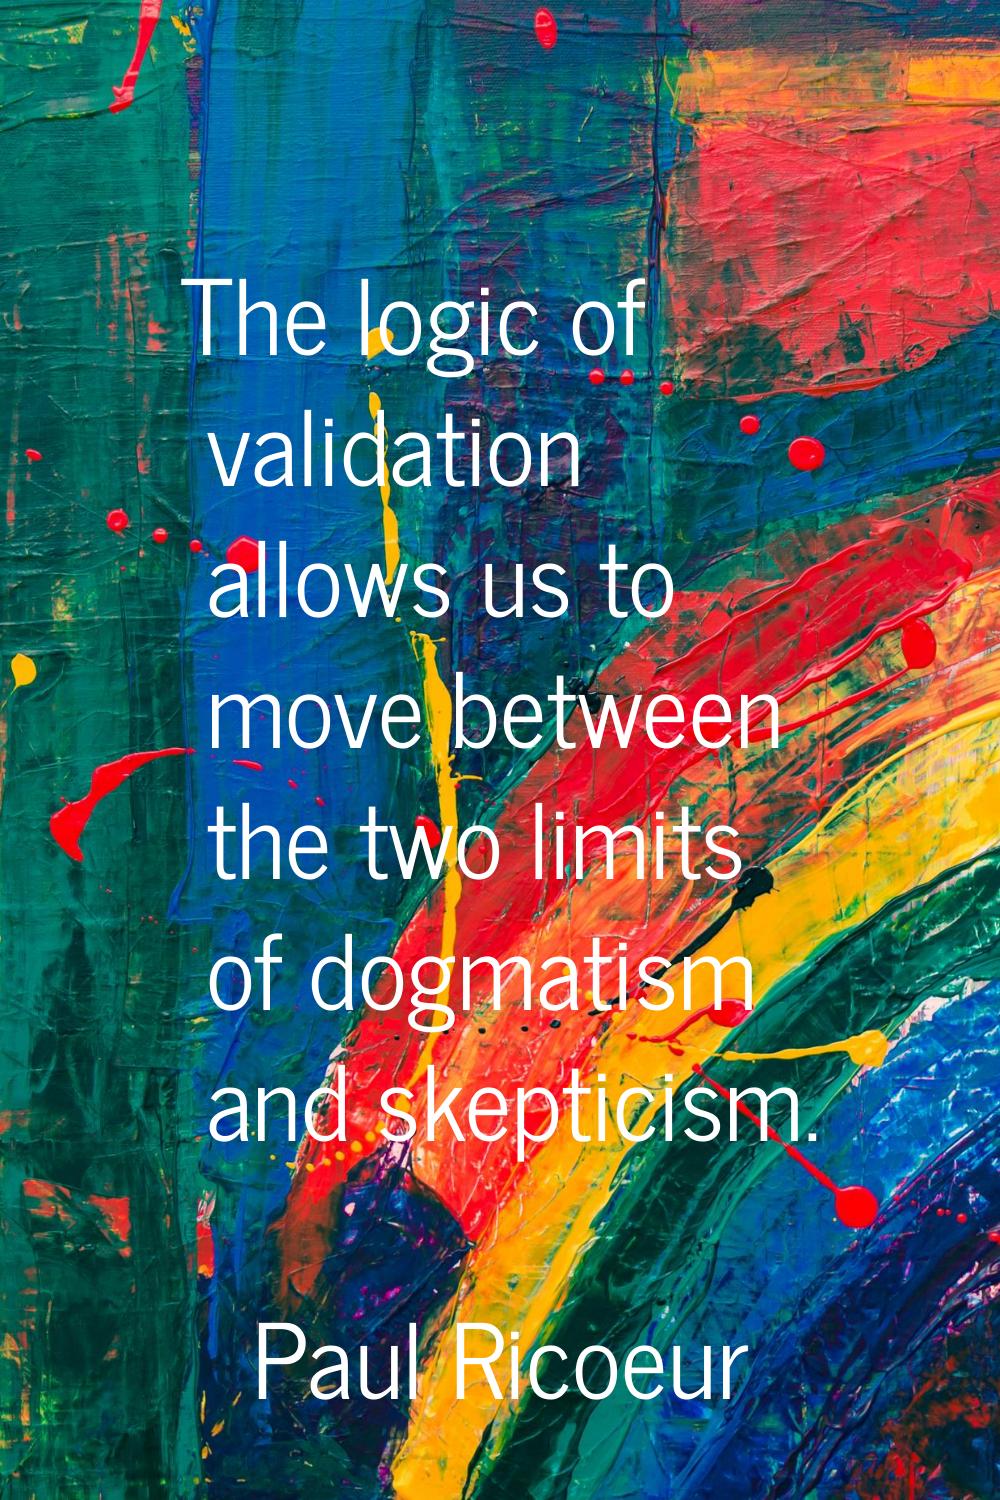 The logic of validation allows us to move between the two limits of dogmatism and skepticism.